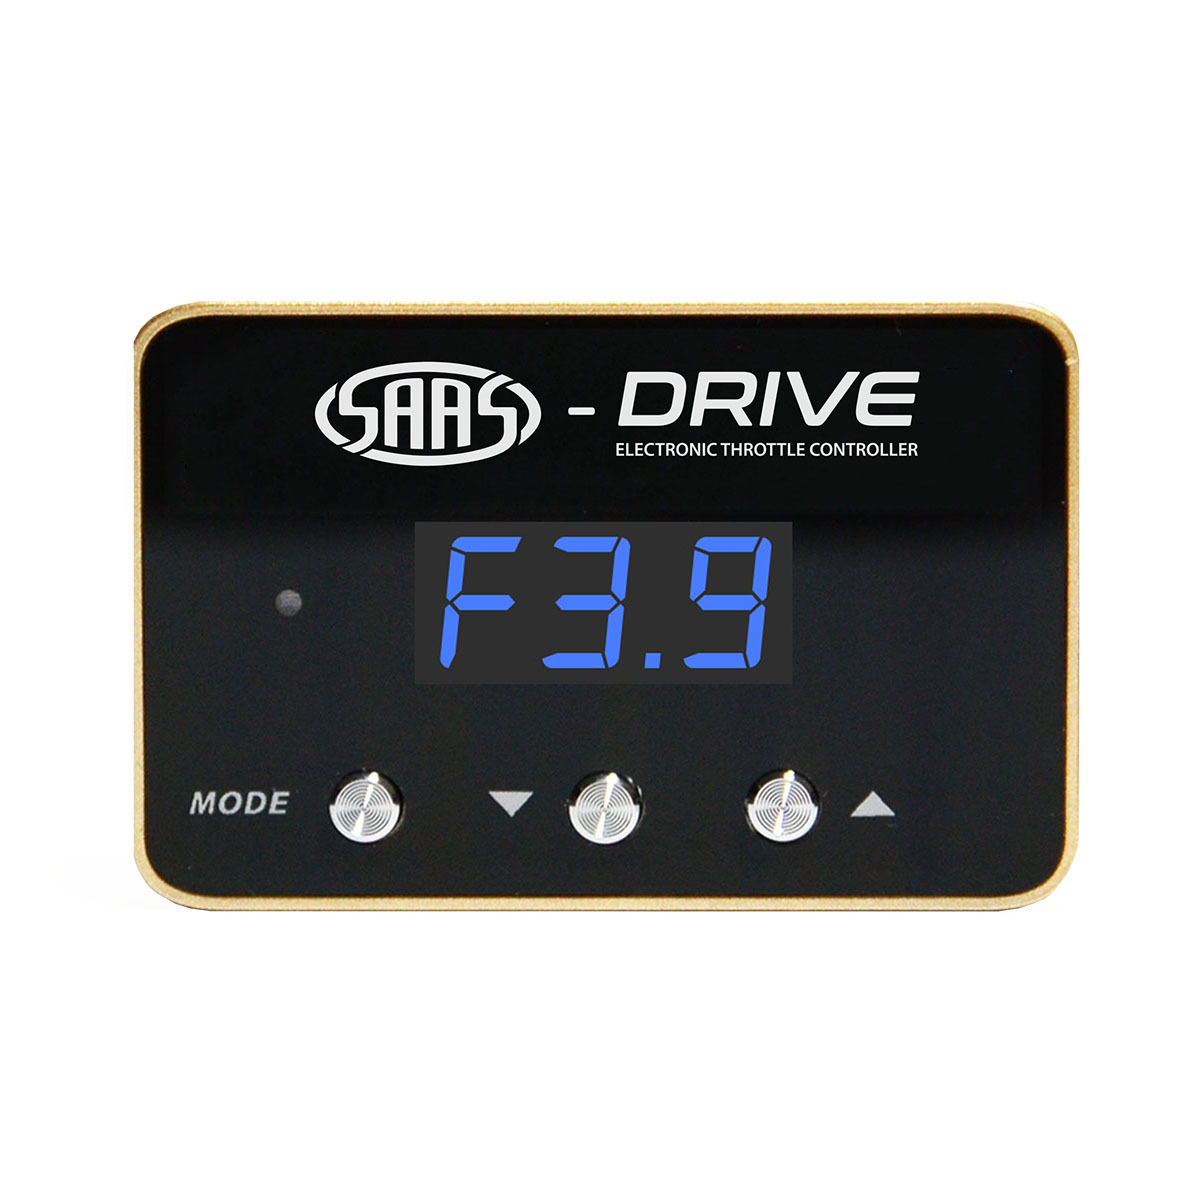 SAAS-Drive Throttle Controller suit Chevrolet GMC and more